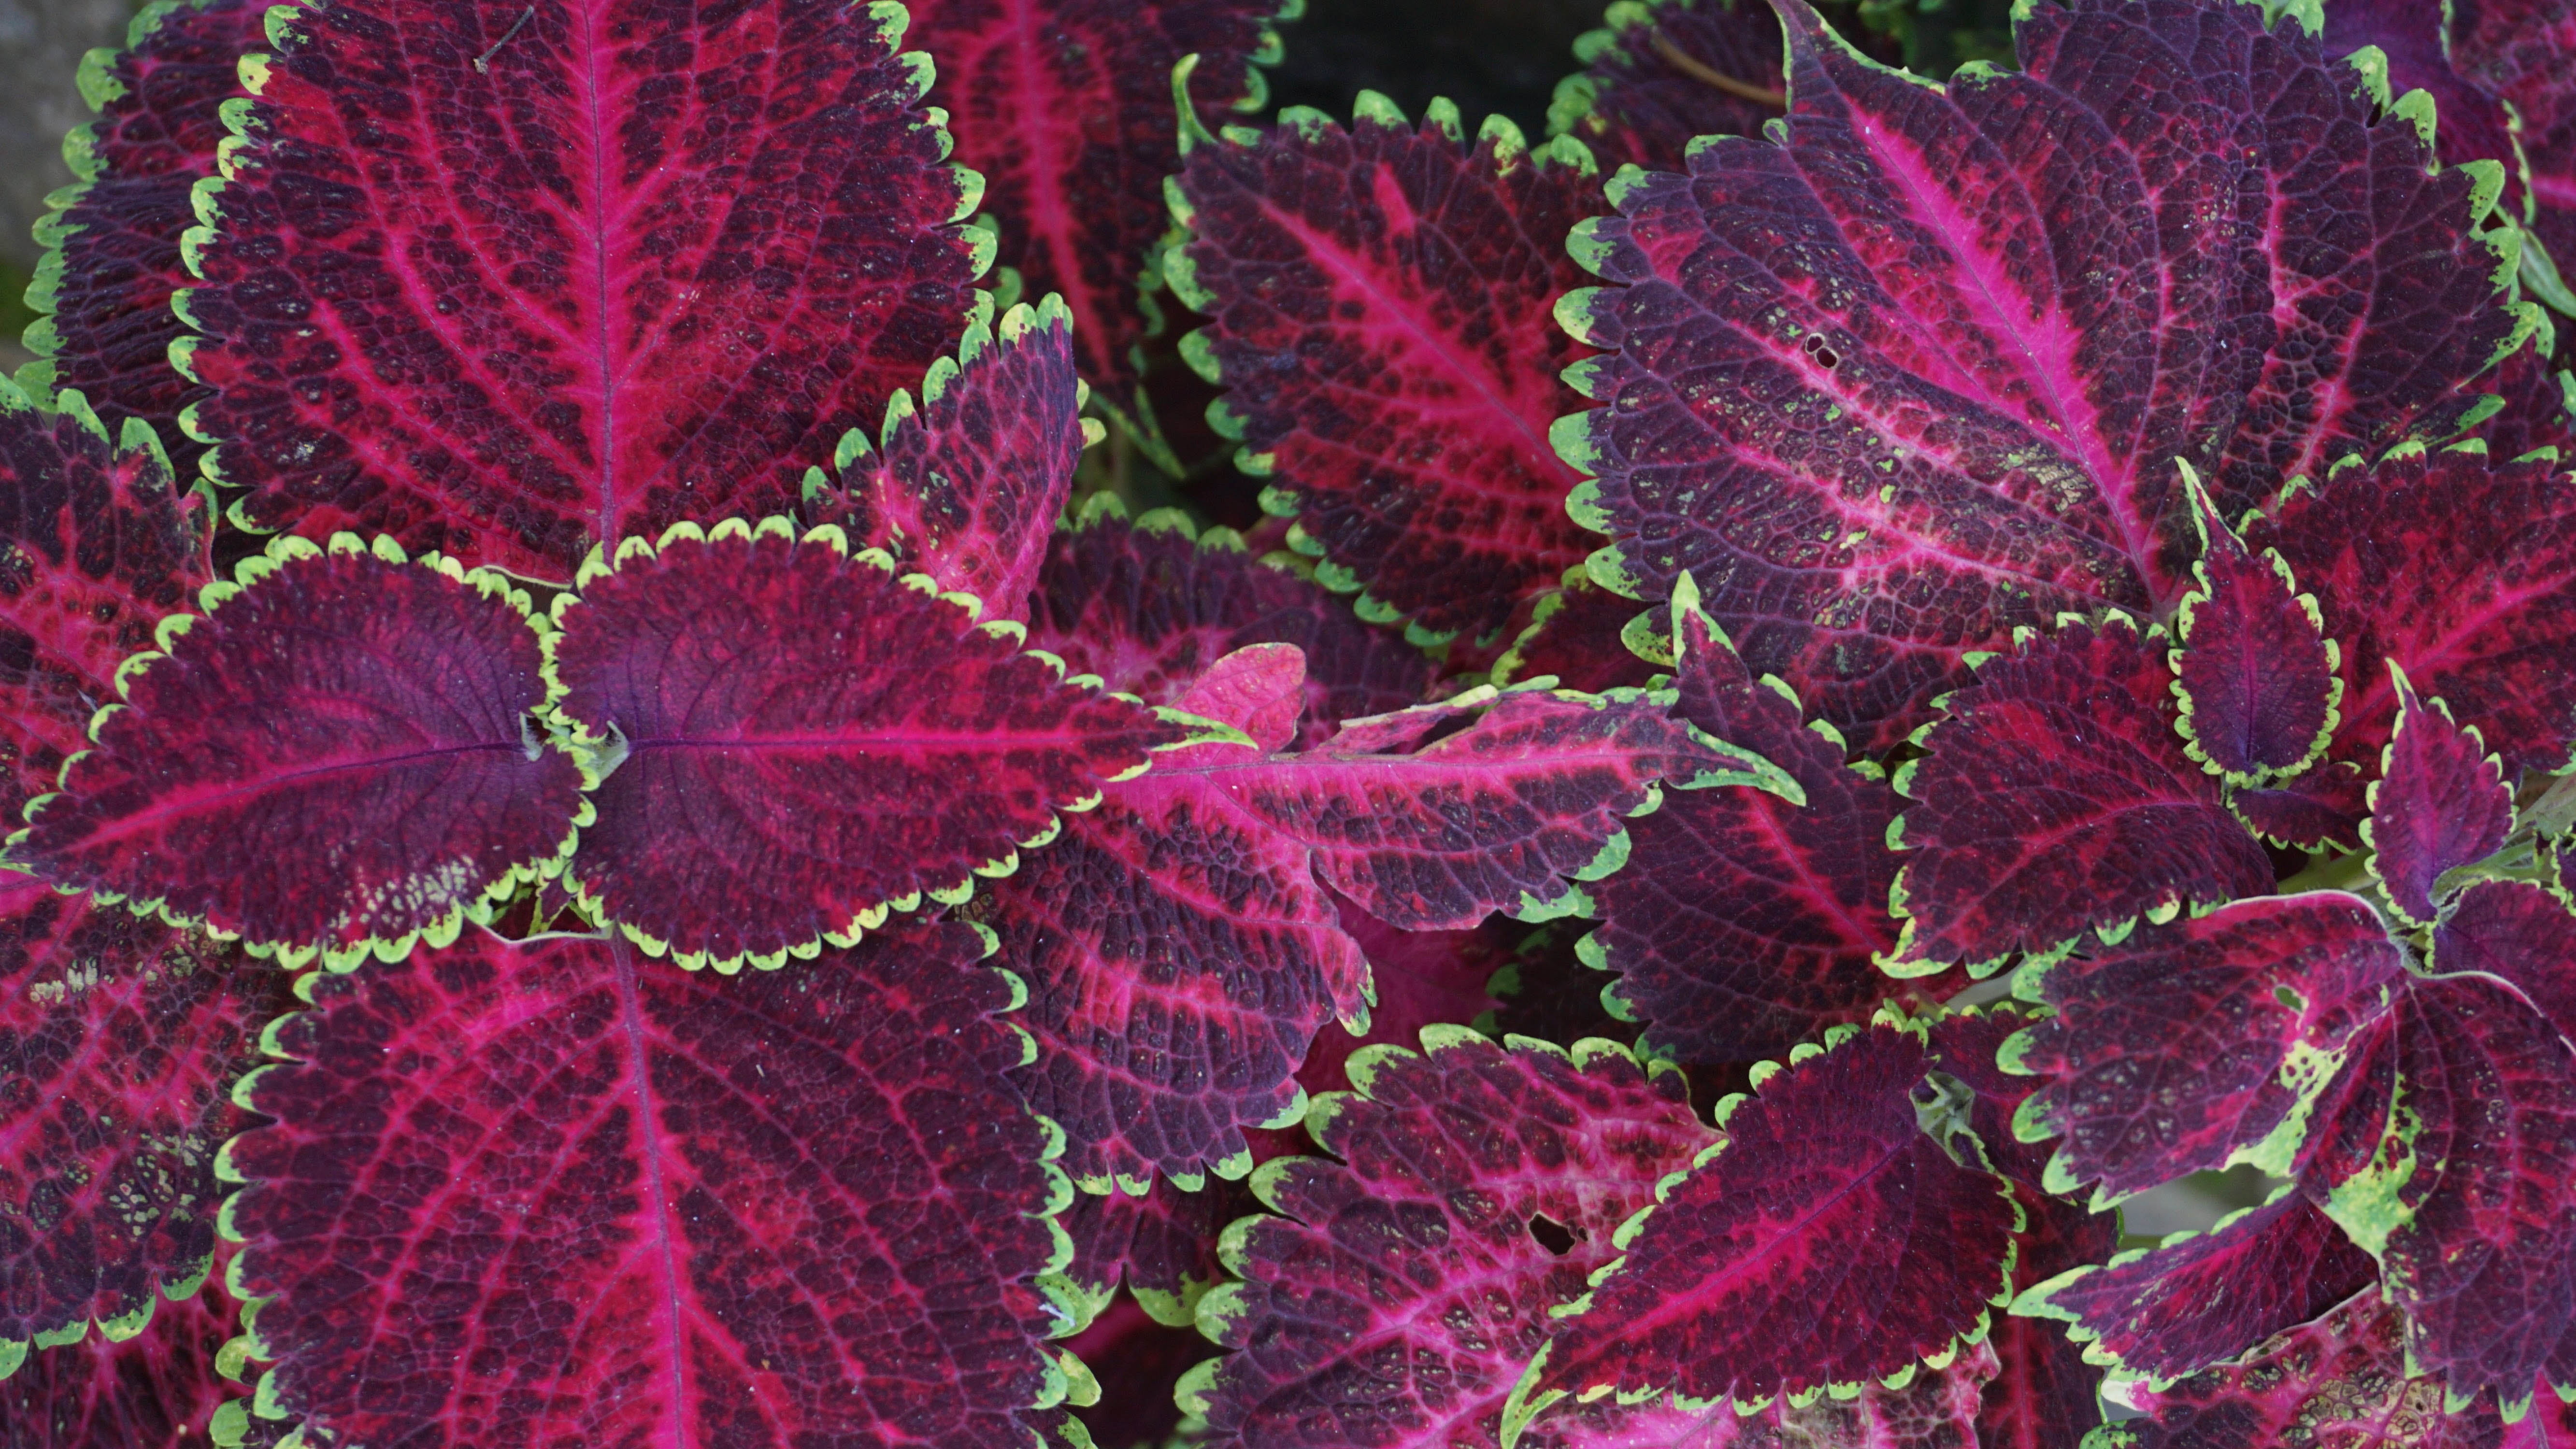 Coleus Flowers Tricolor Purple And Red With Green Edging Wallpaper Hd For Mobile Phone 5332×3000